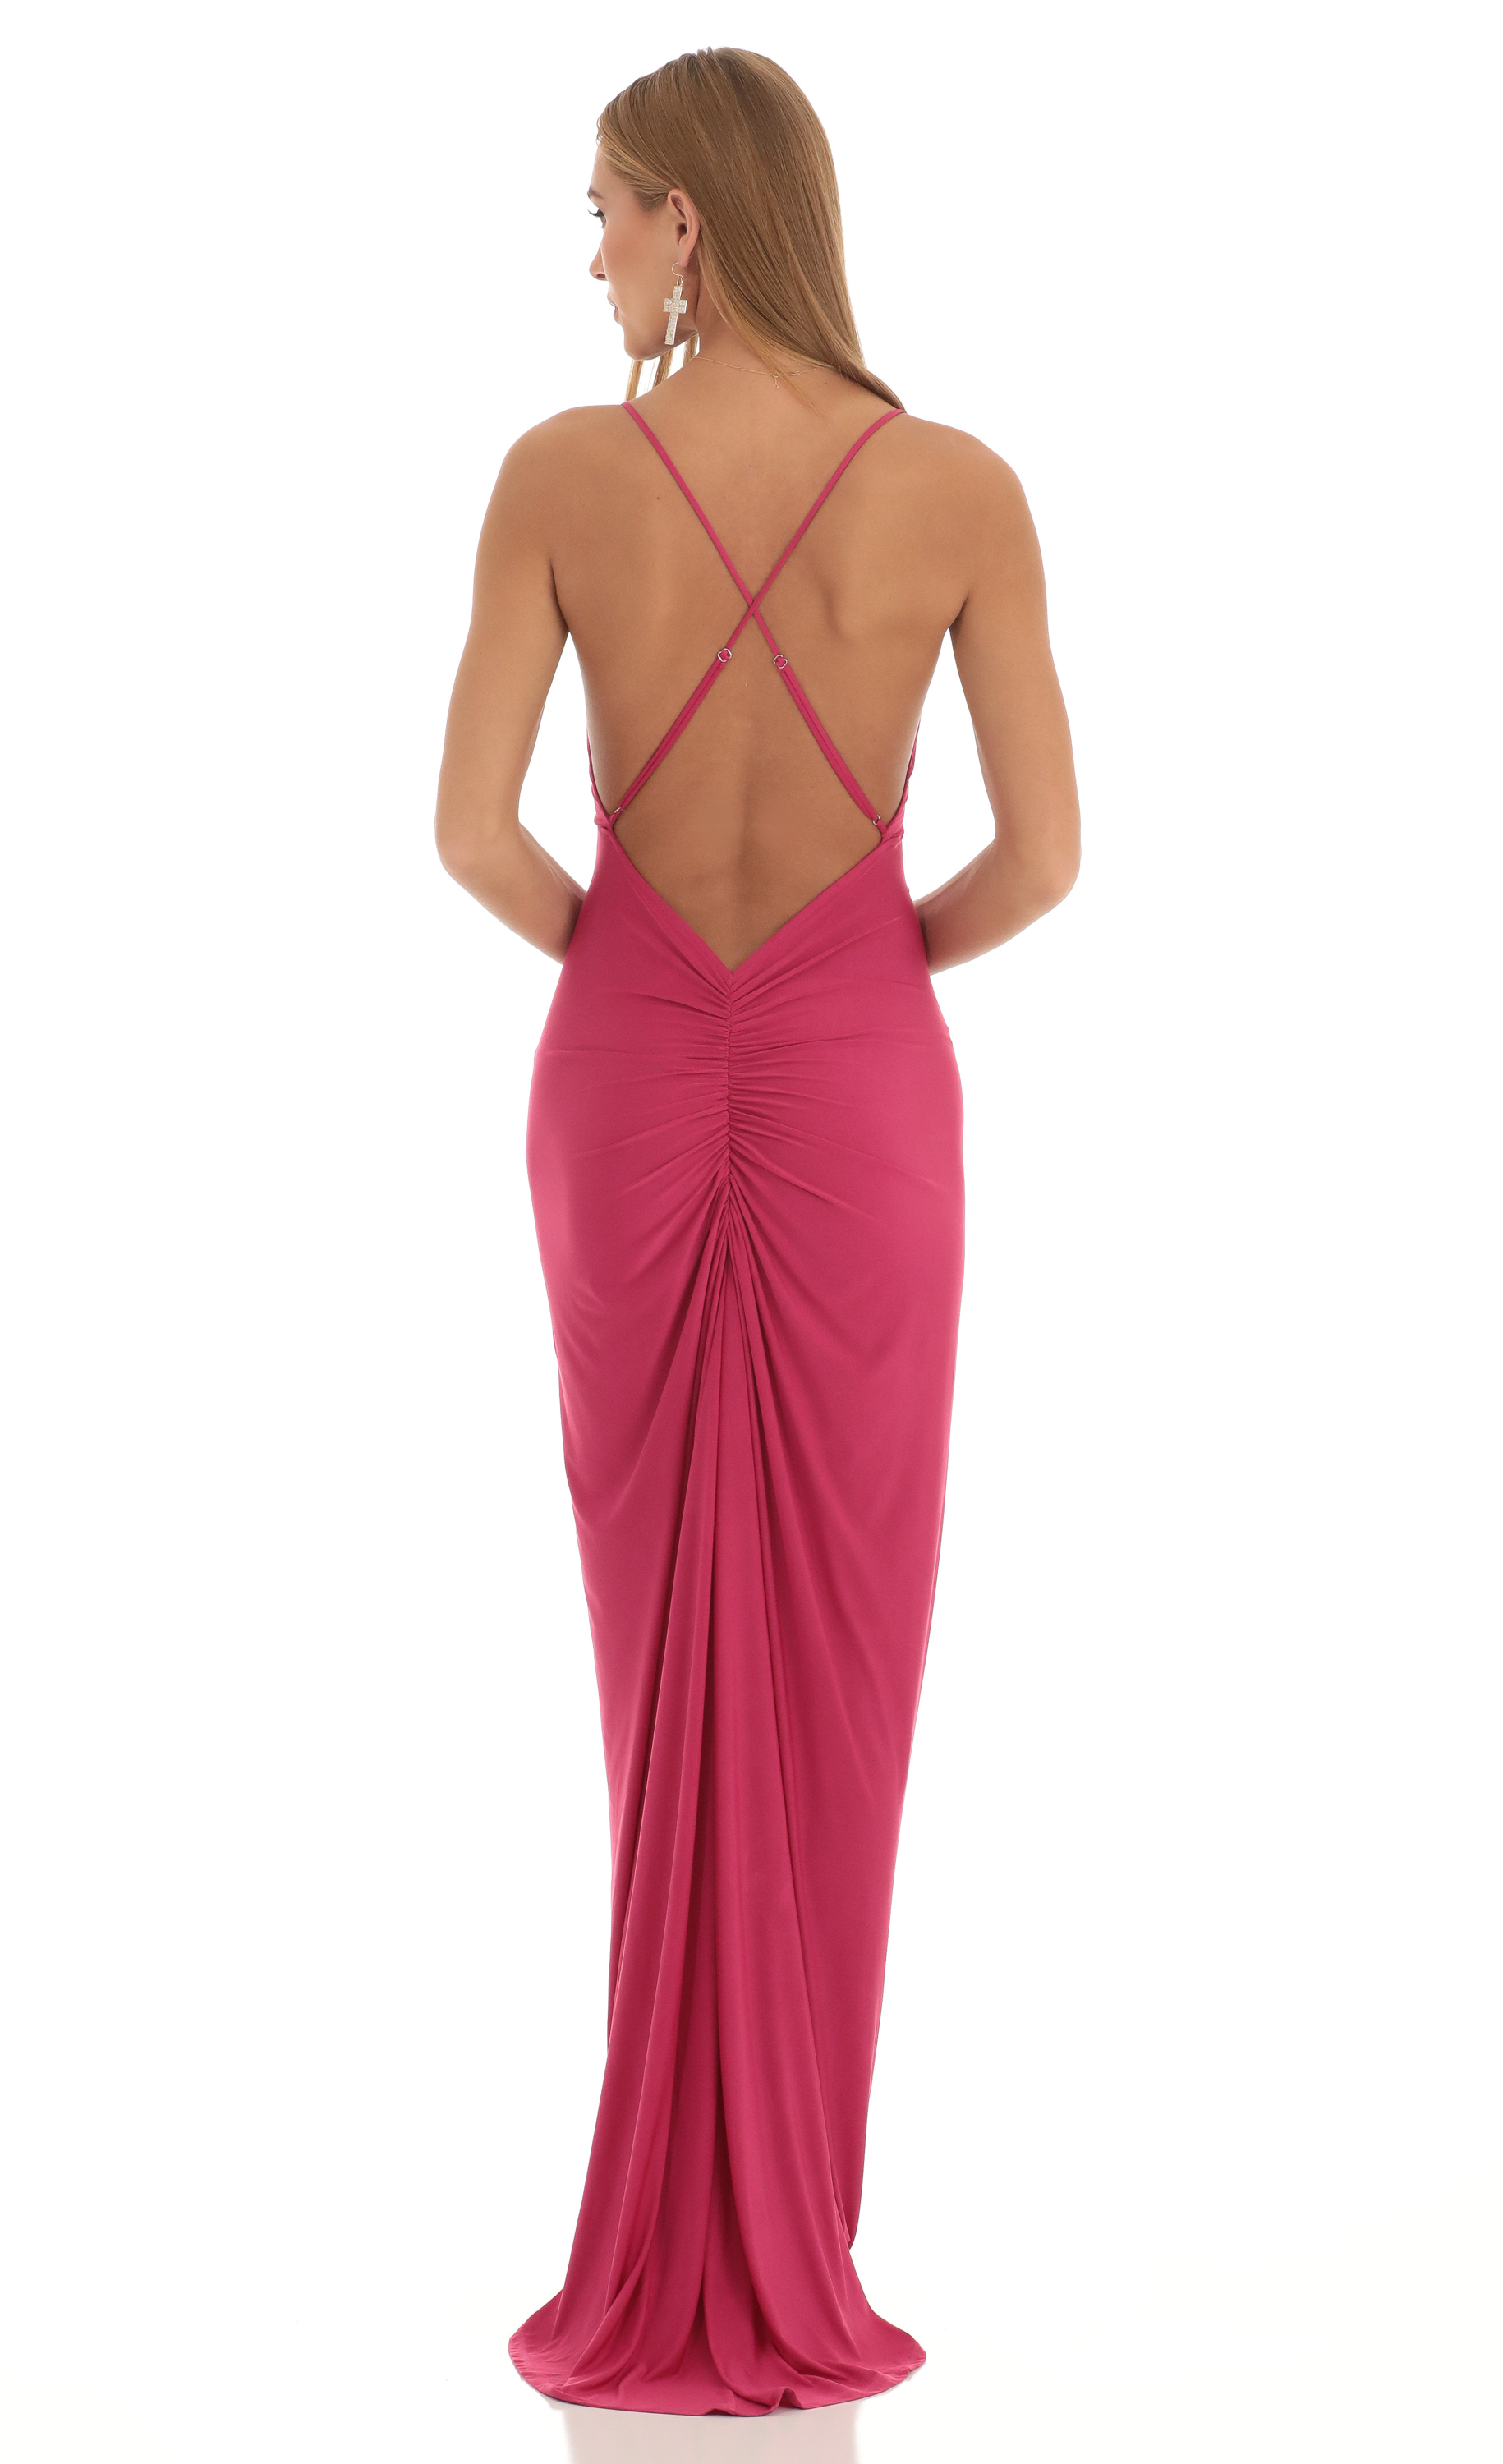 Ladie Gathered Cross Back Maxi Dress in Hot Pink